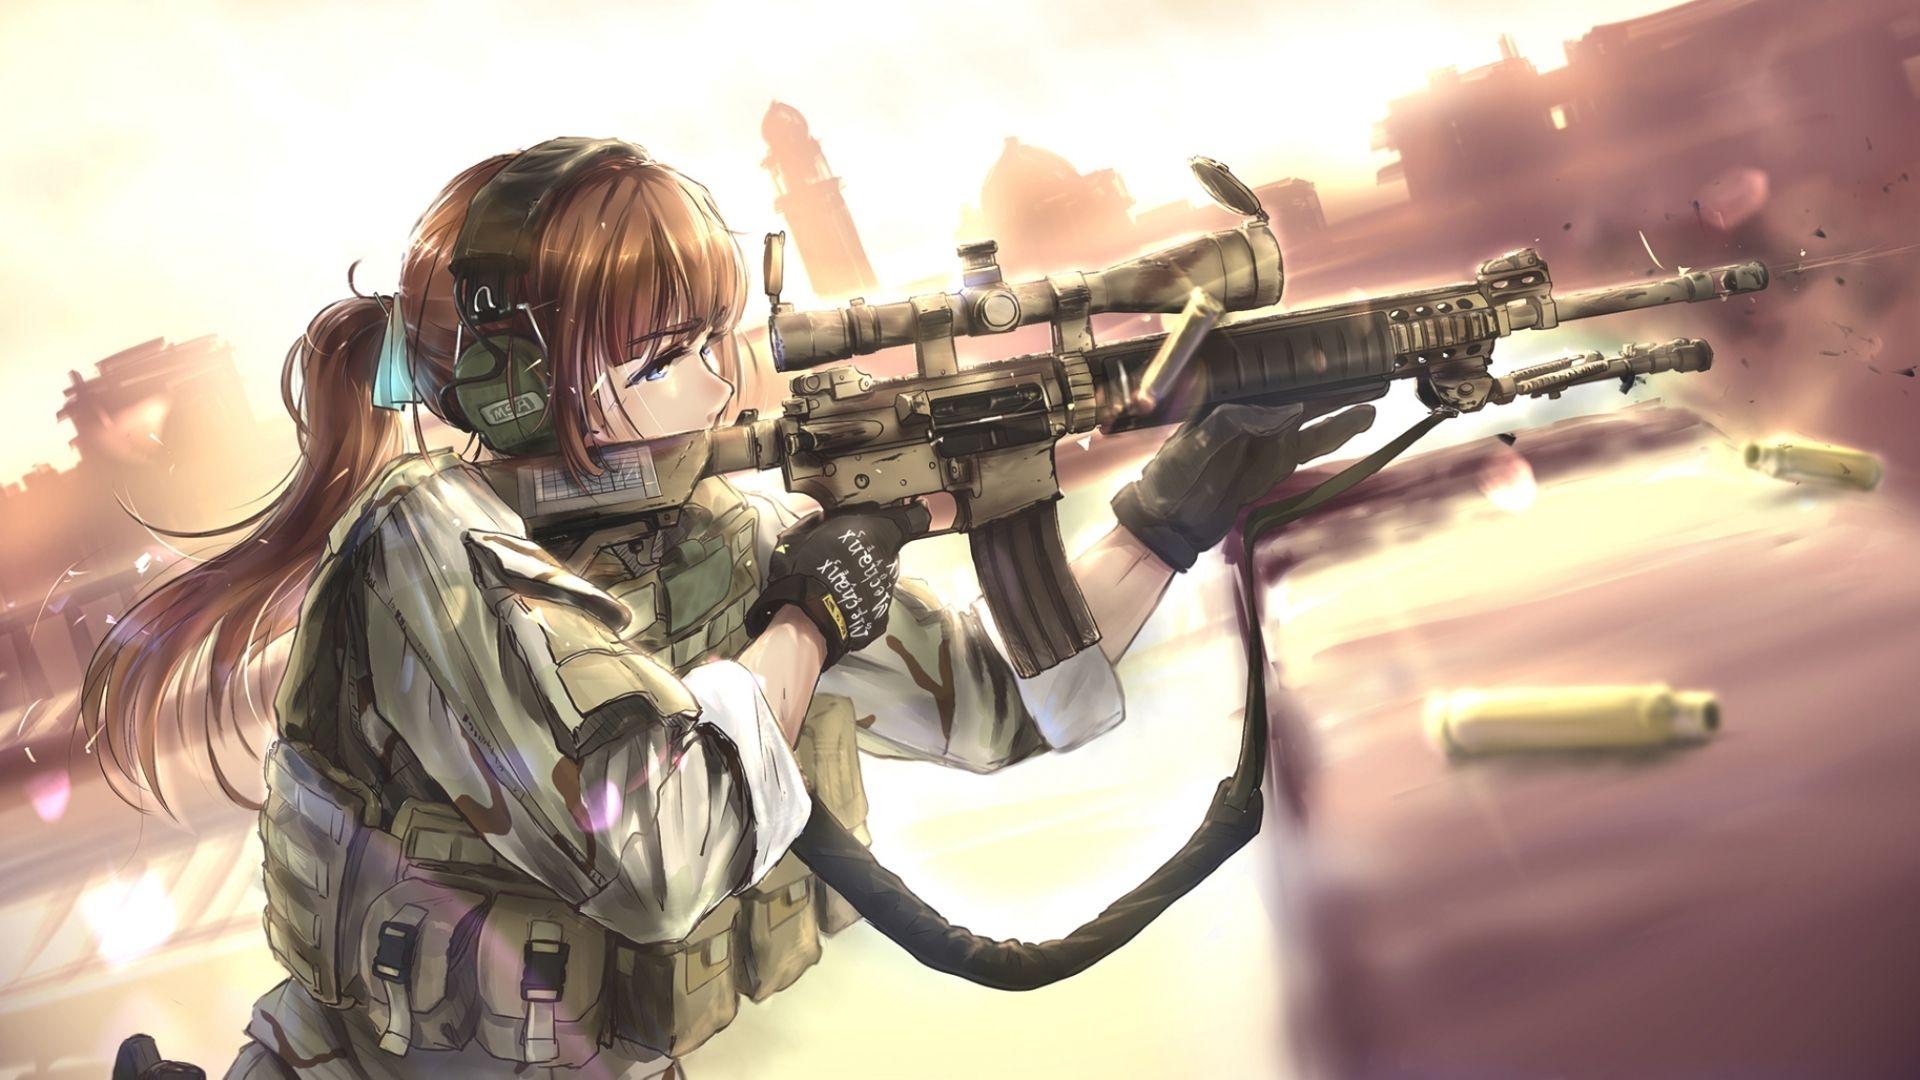 Sniper Boy Style Anime Wallpapers - Wallpaper Cave